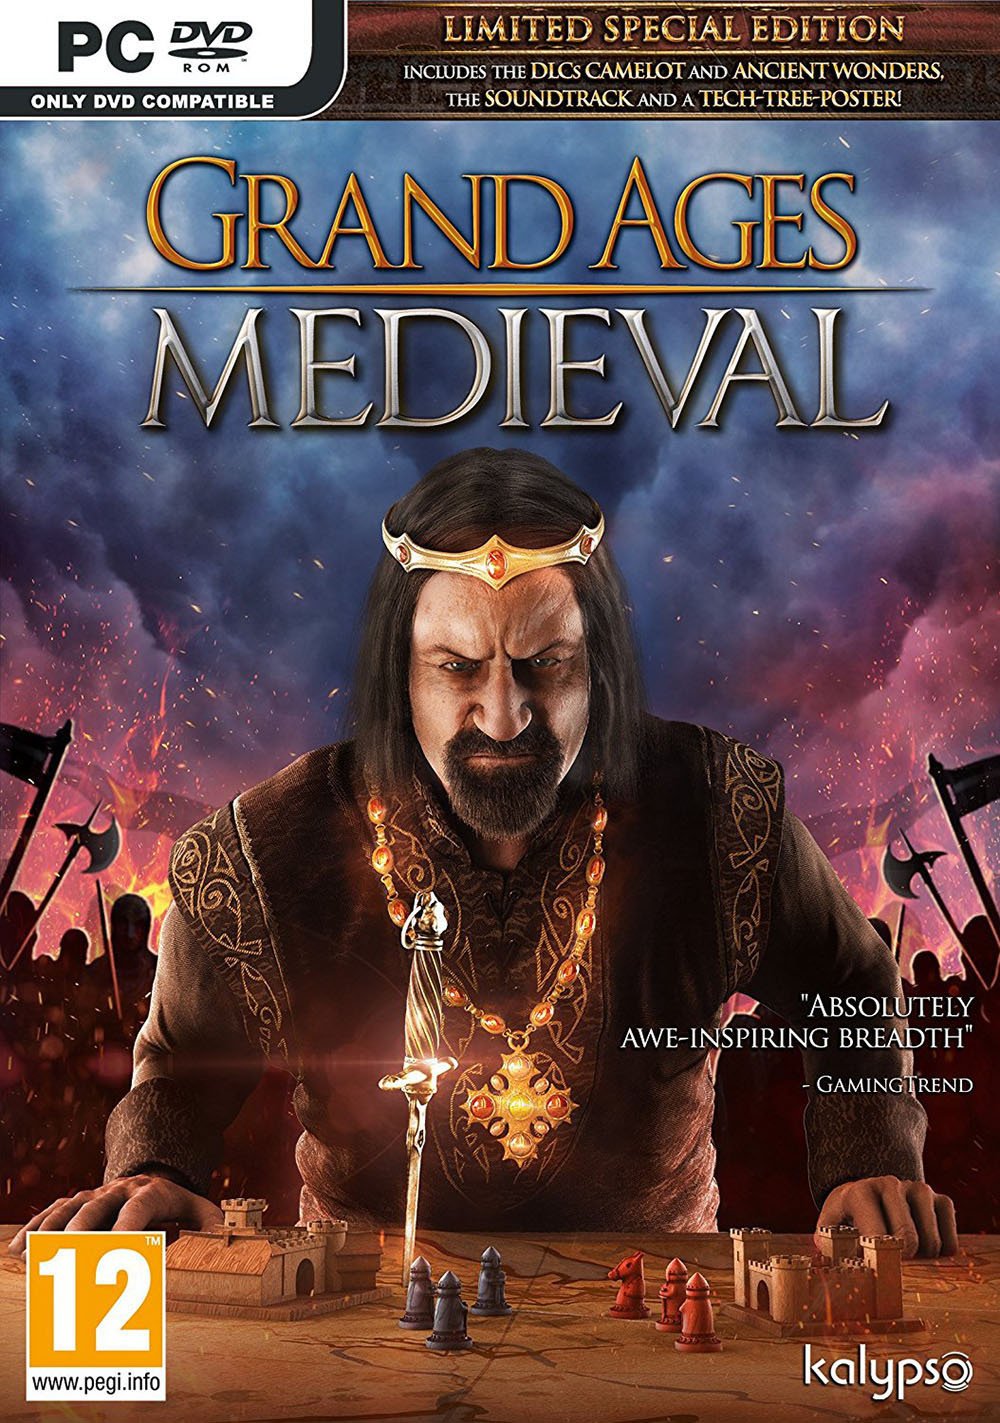 Grand Ages Medieval PC Game